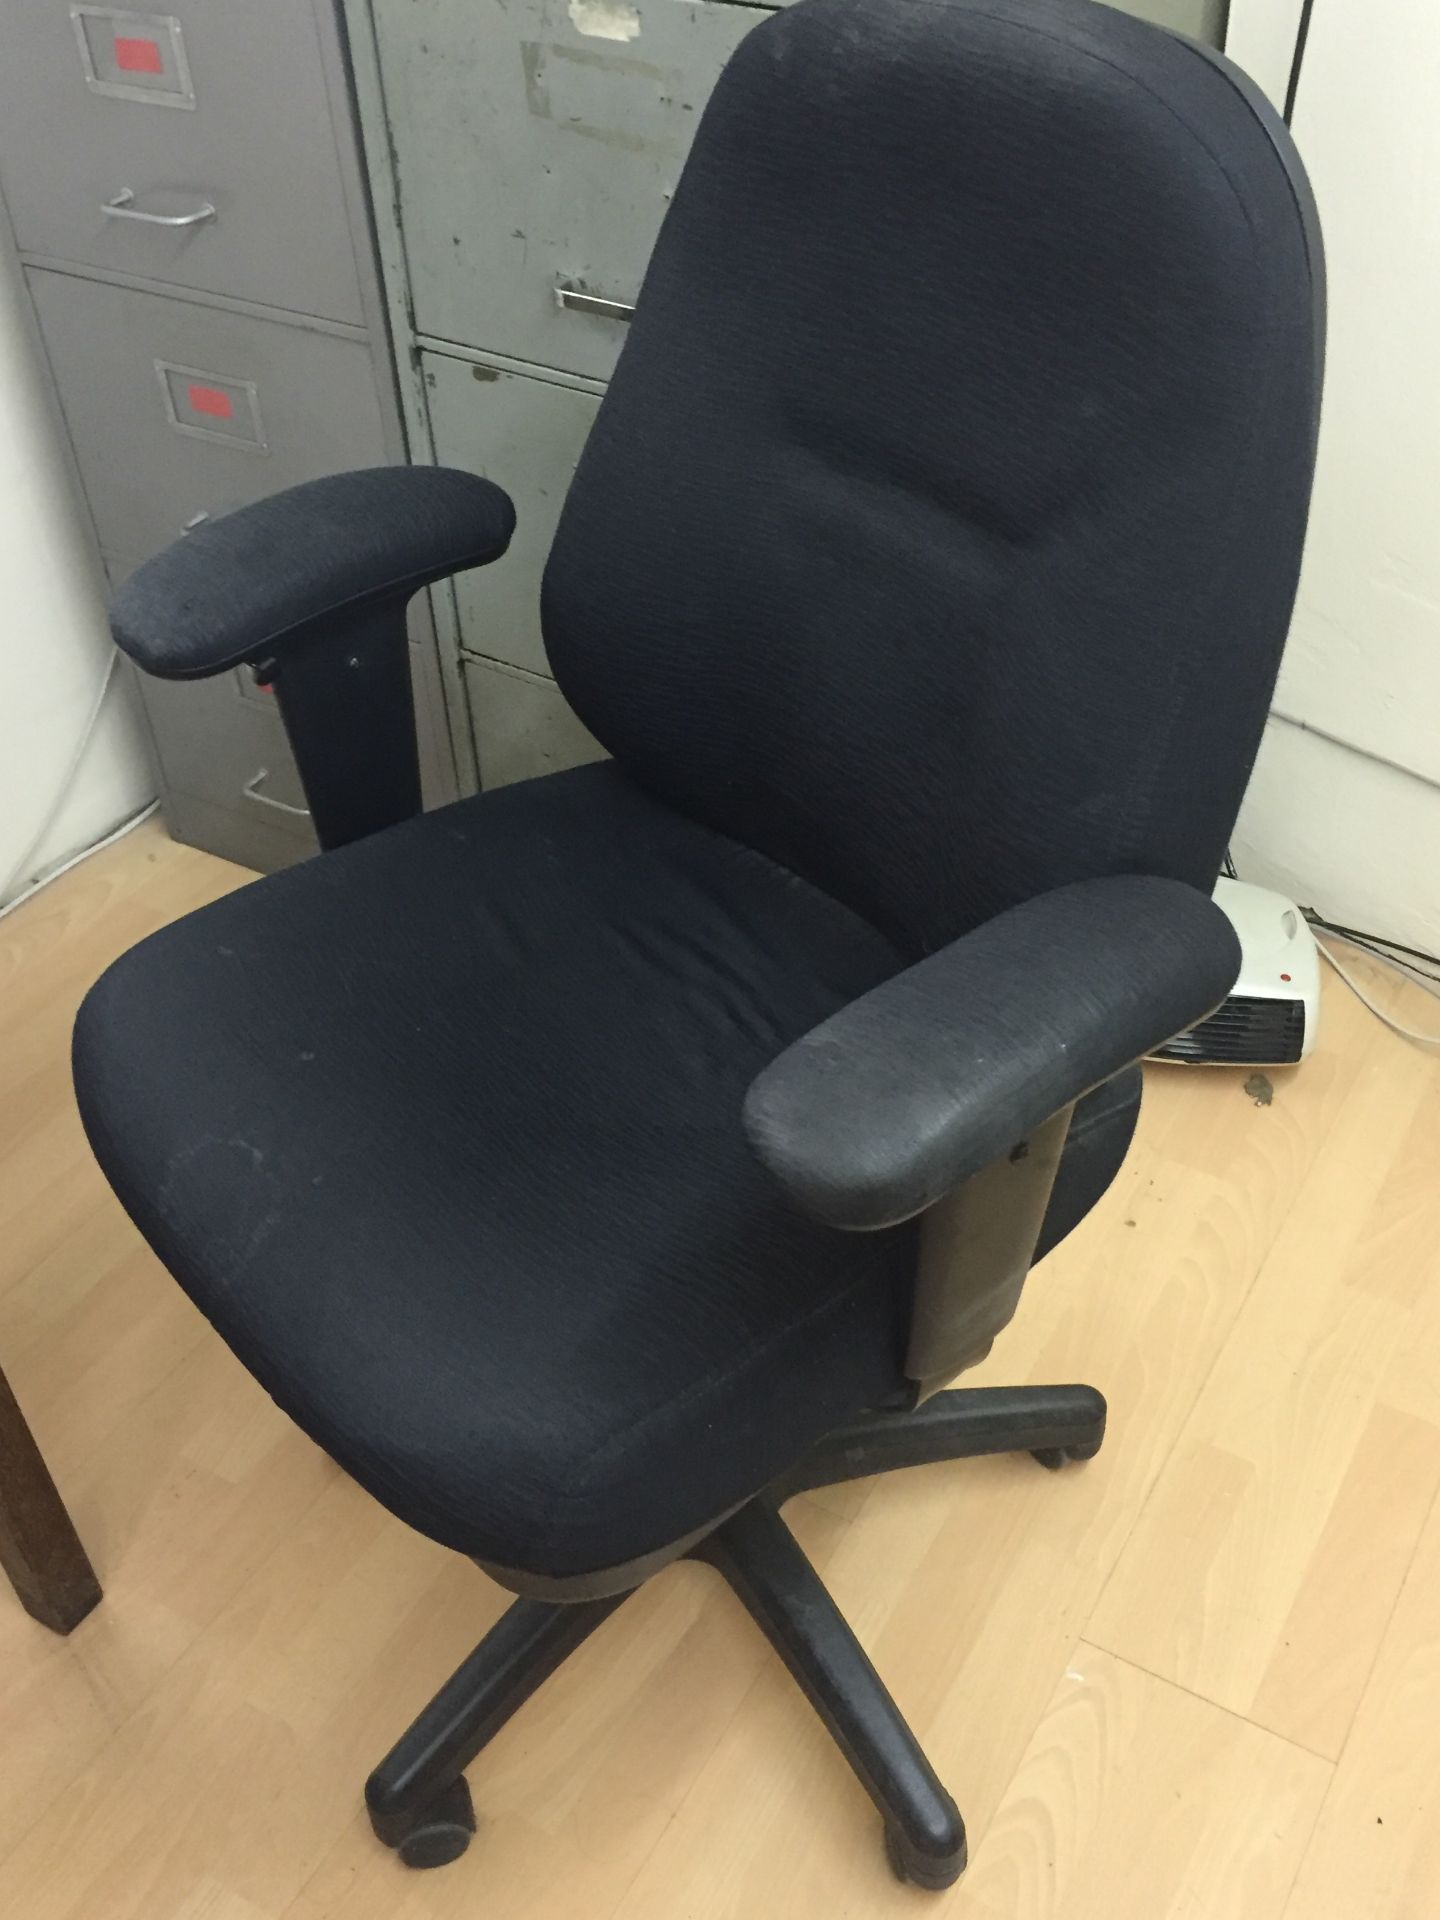 1 x Black Office Chair - CL171 - Location: London, N4 - Image 3 of 3